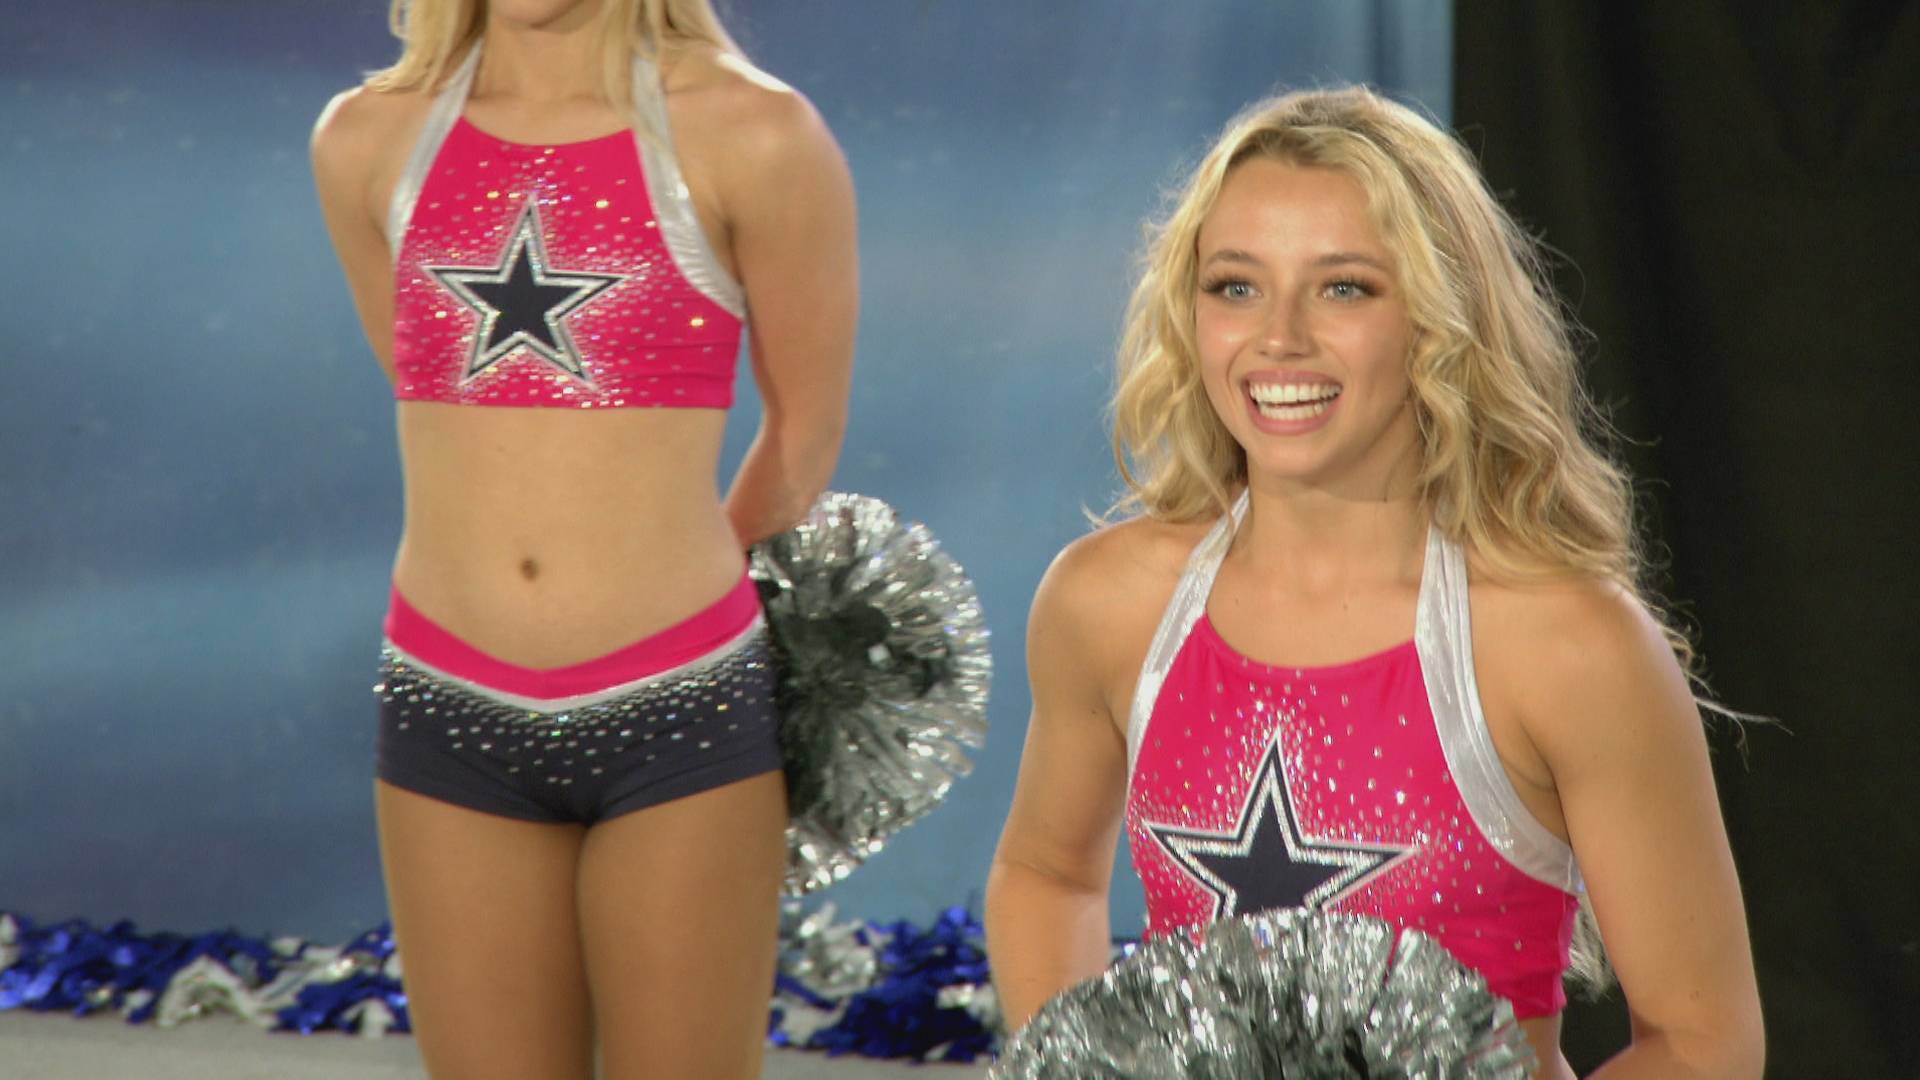 Dallas Cowboys Cheerleaders: Making the Team - Season 16, Ep. 2 - You Came  to Play! - Full Episode